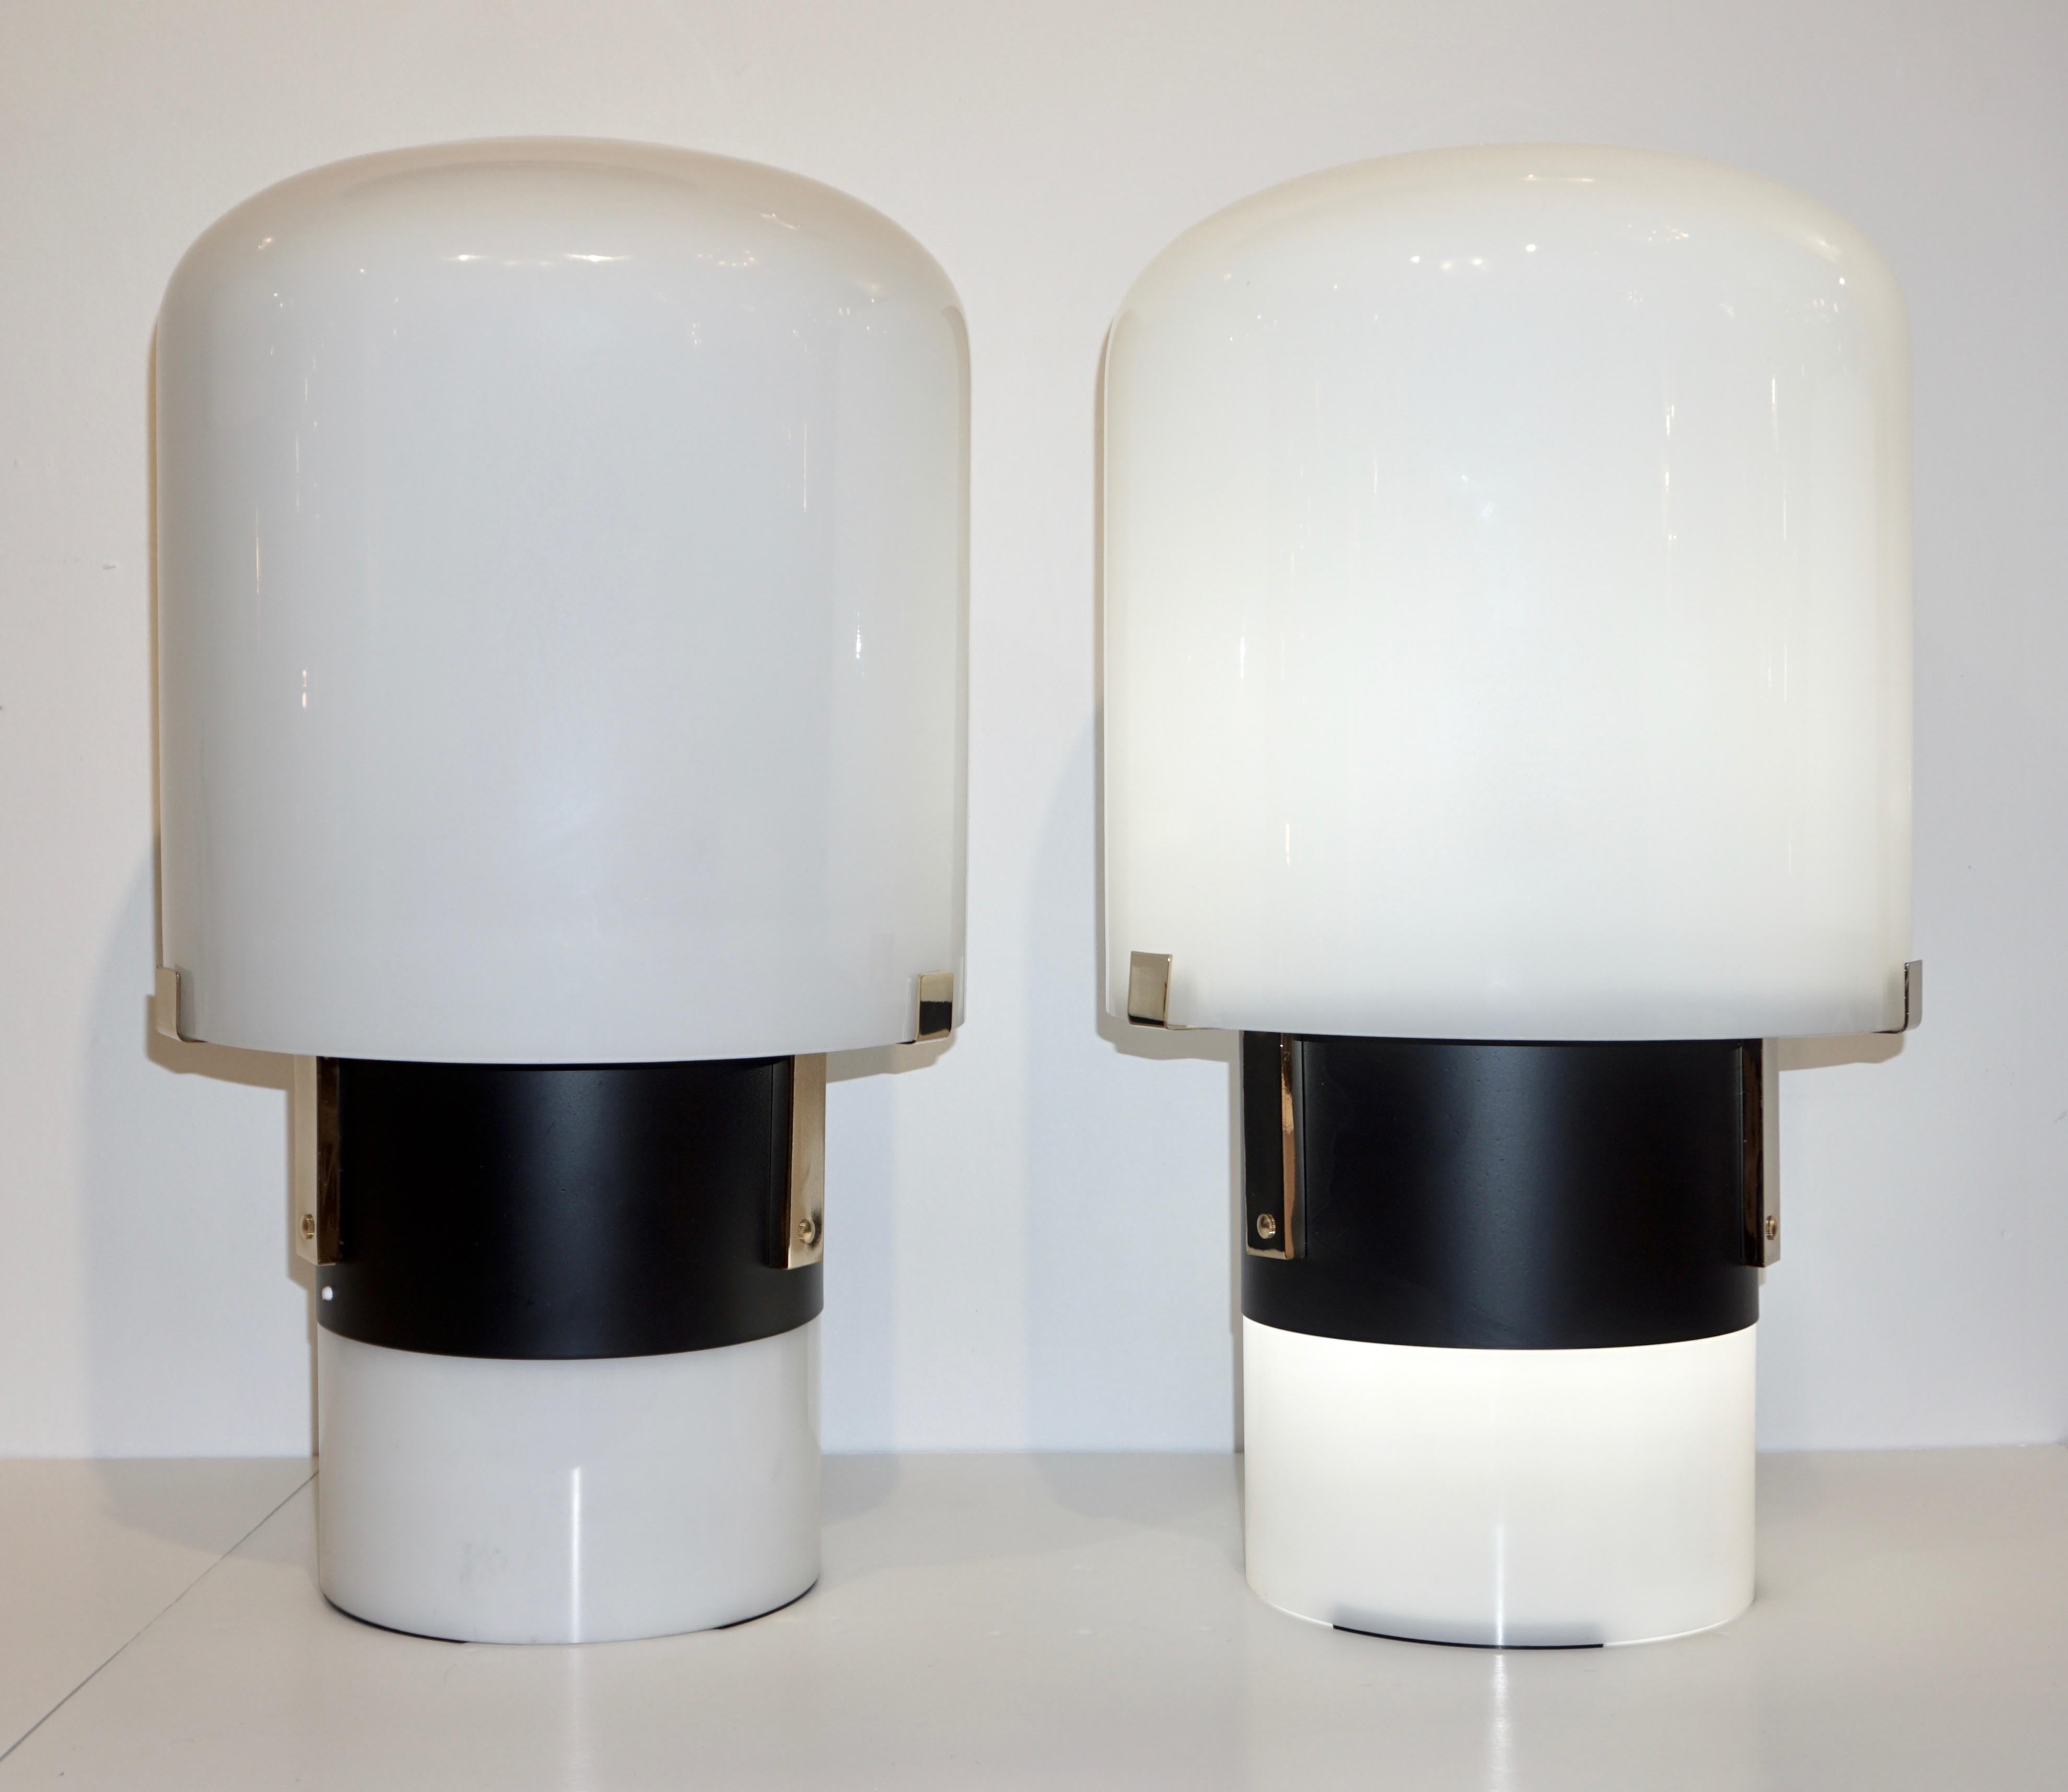 Italian architectural Pair of tall mushroom table lamps or floor lamps of urban modern design by LOM, a lighting company in Monza (near Milan), closed in the 1990s, distinguished by the use of excellent materials and effective simple Design. The